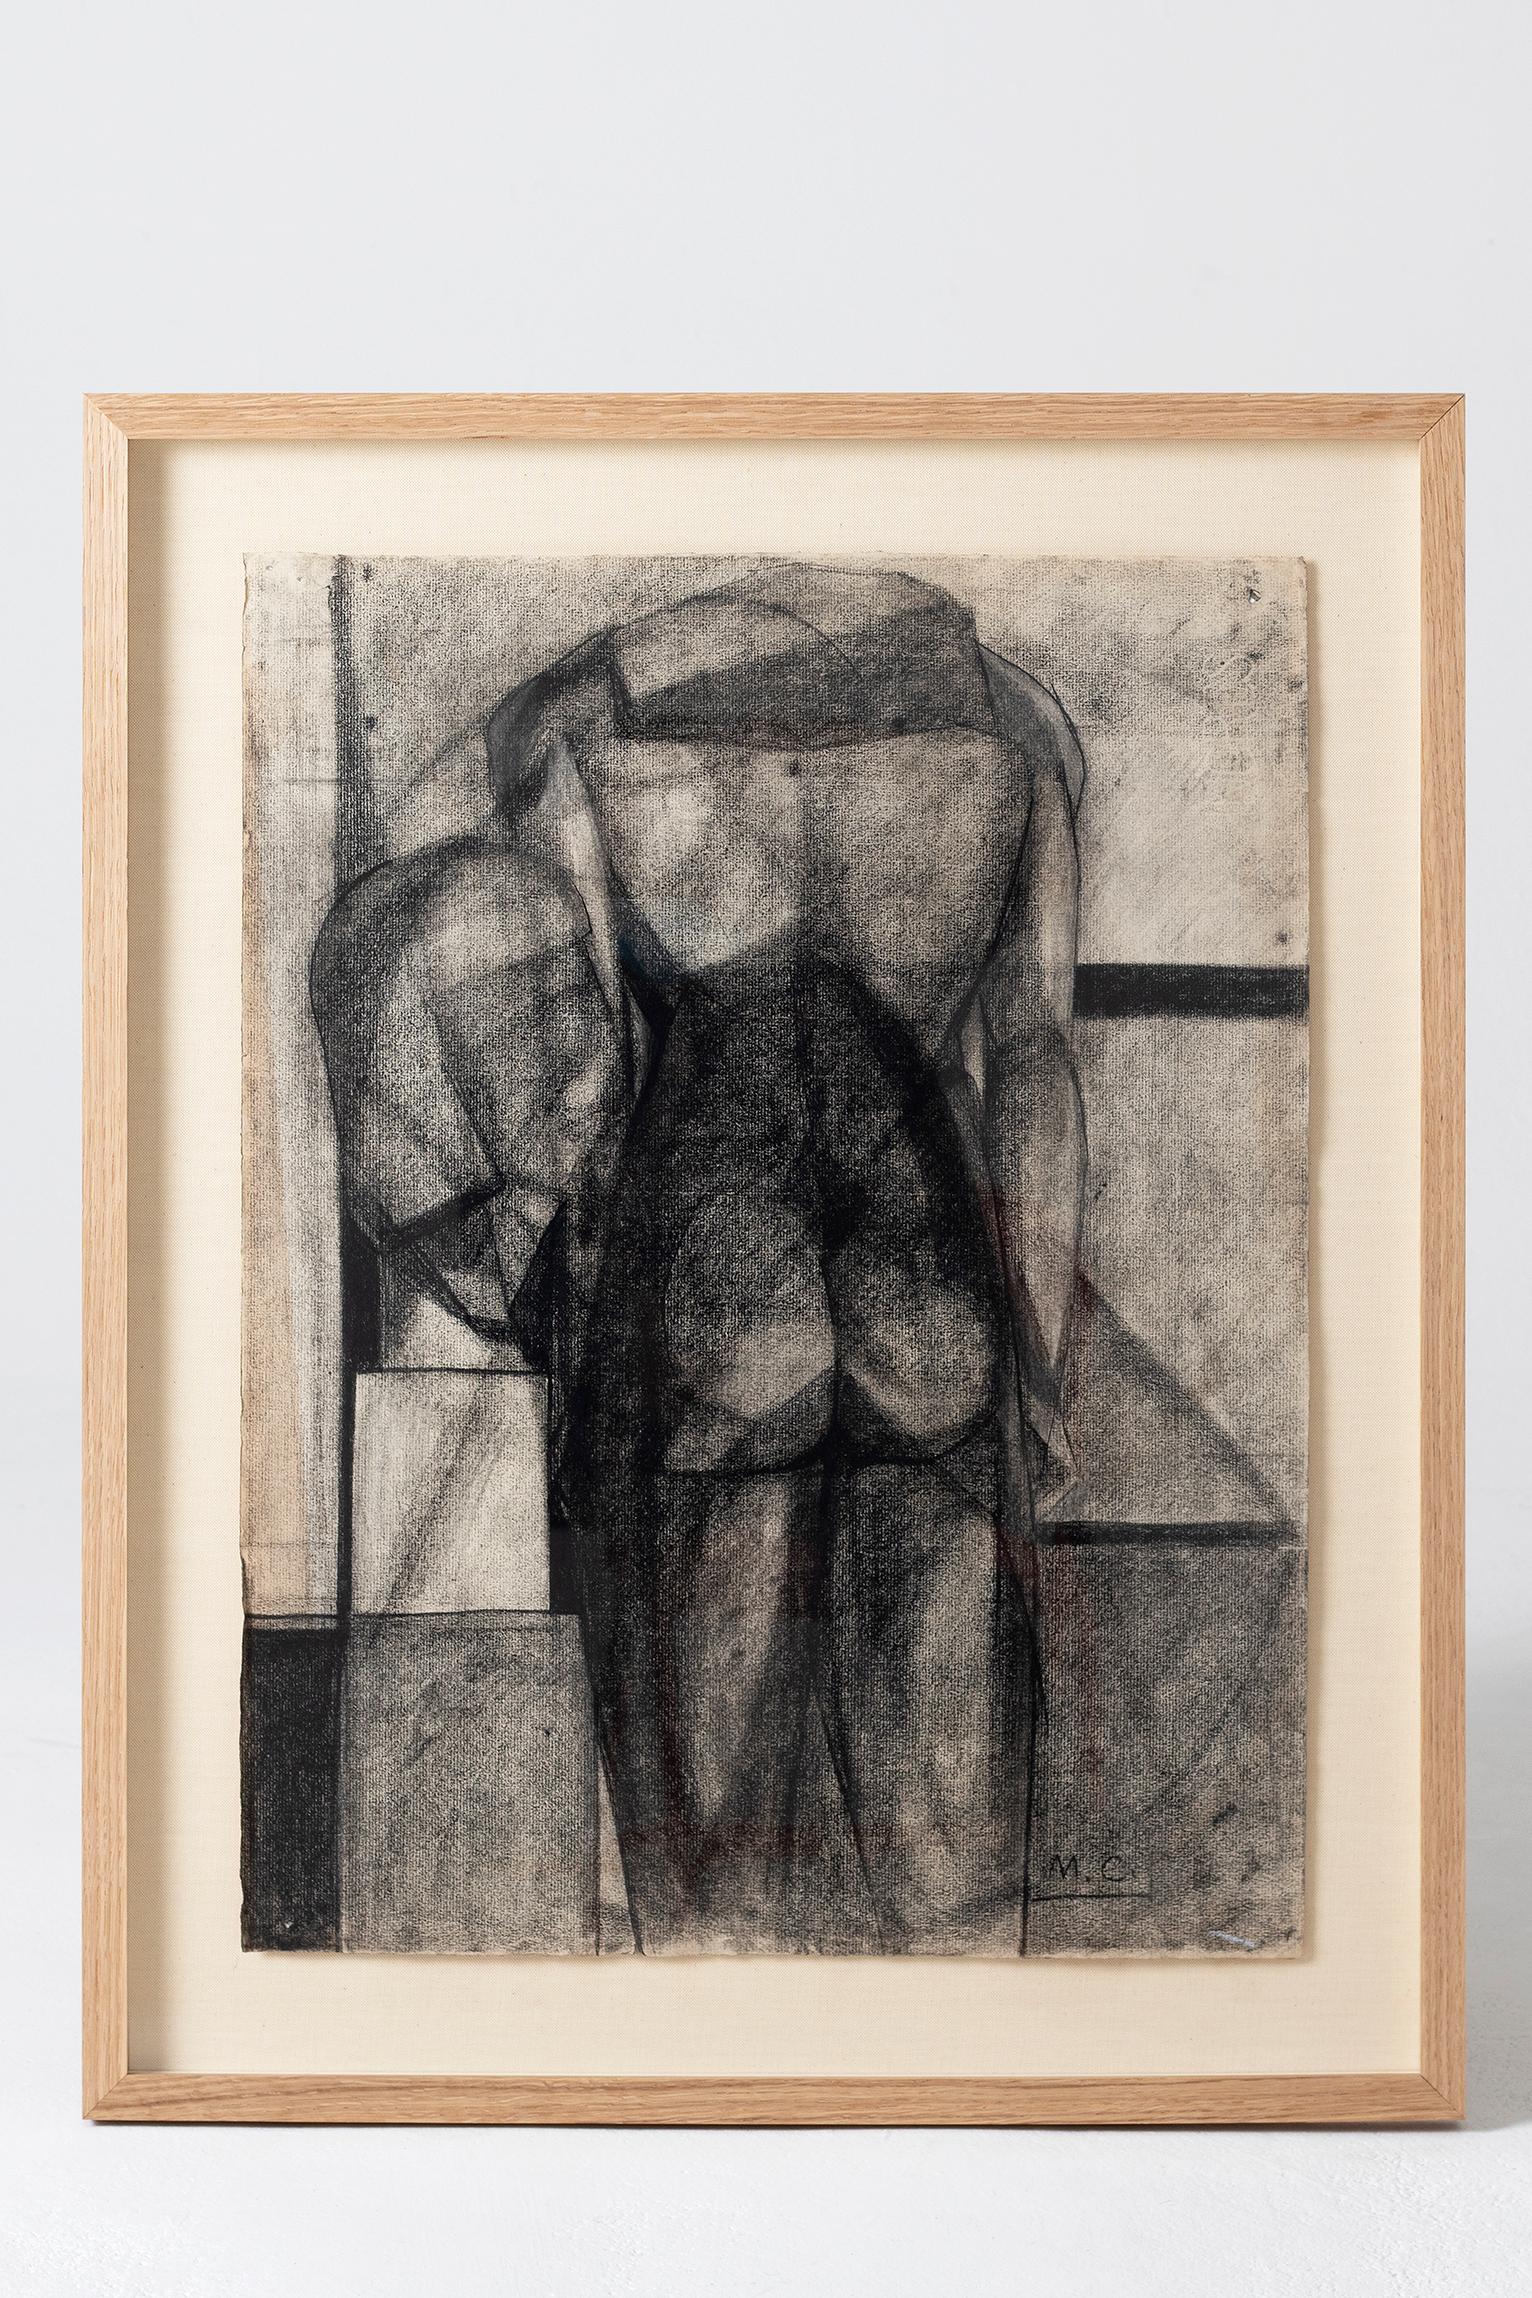 An original nude drawing, by Marceau Constantin, (1918-2017).
Charcoal on Ingres paper. Initialed M.C.
France, circa 1940.
In a modern oak and linen floating frame.  



Marceau Constantin

Coming from a family of Greek immigrants, son of